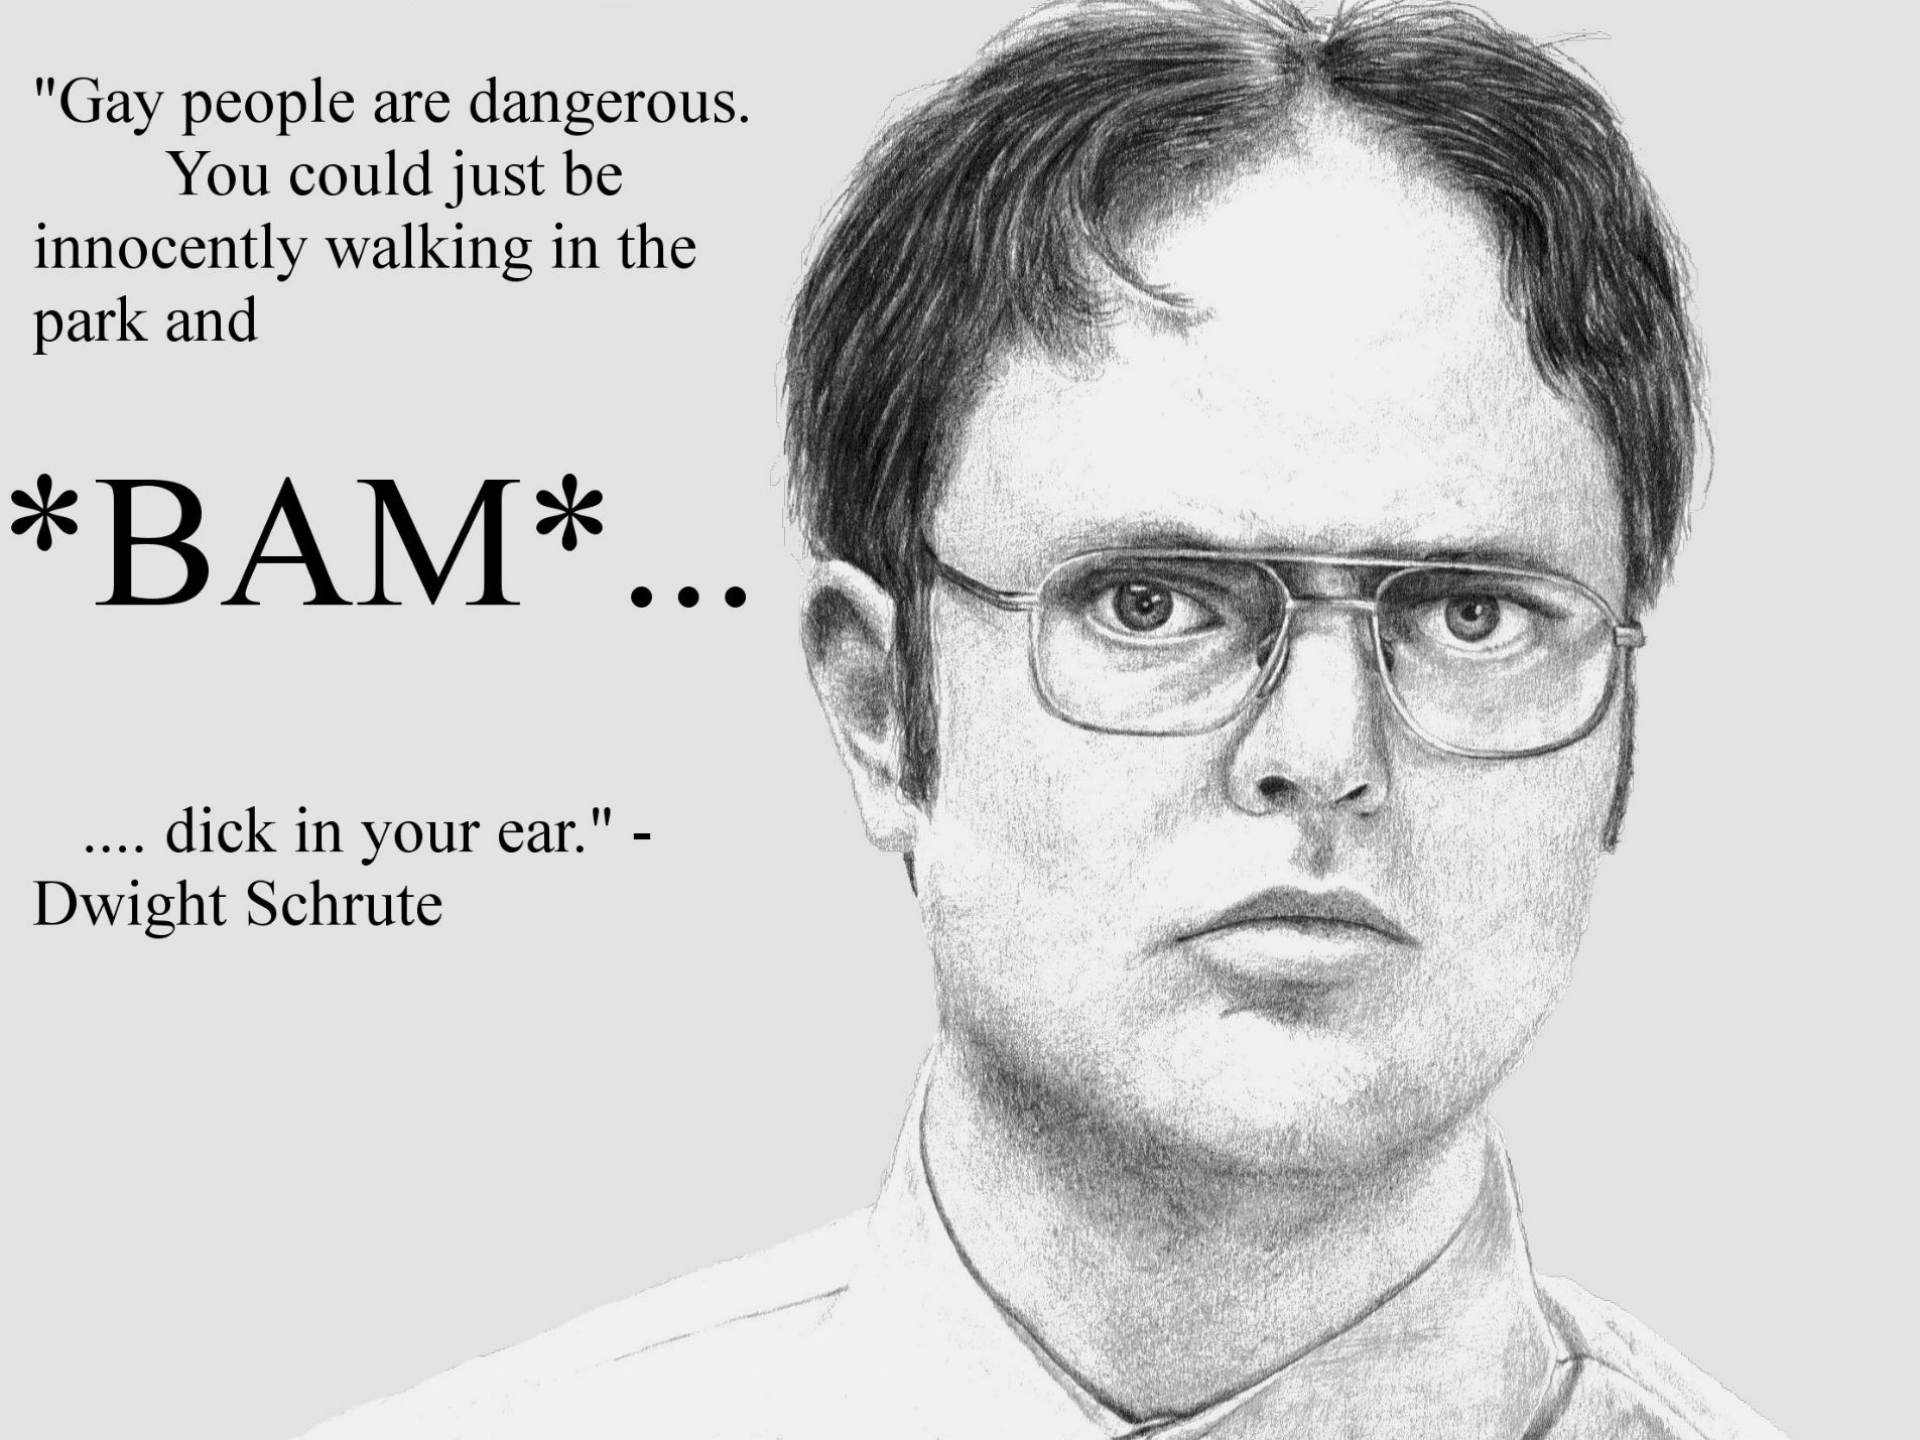 quotes, Funny, The, Office, Dwight, Schrute, Drawings, Knowledge, Quotes, Humor, Sadic, Gay Wallpaper